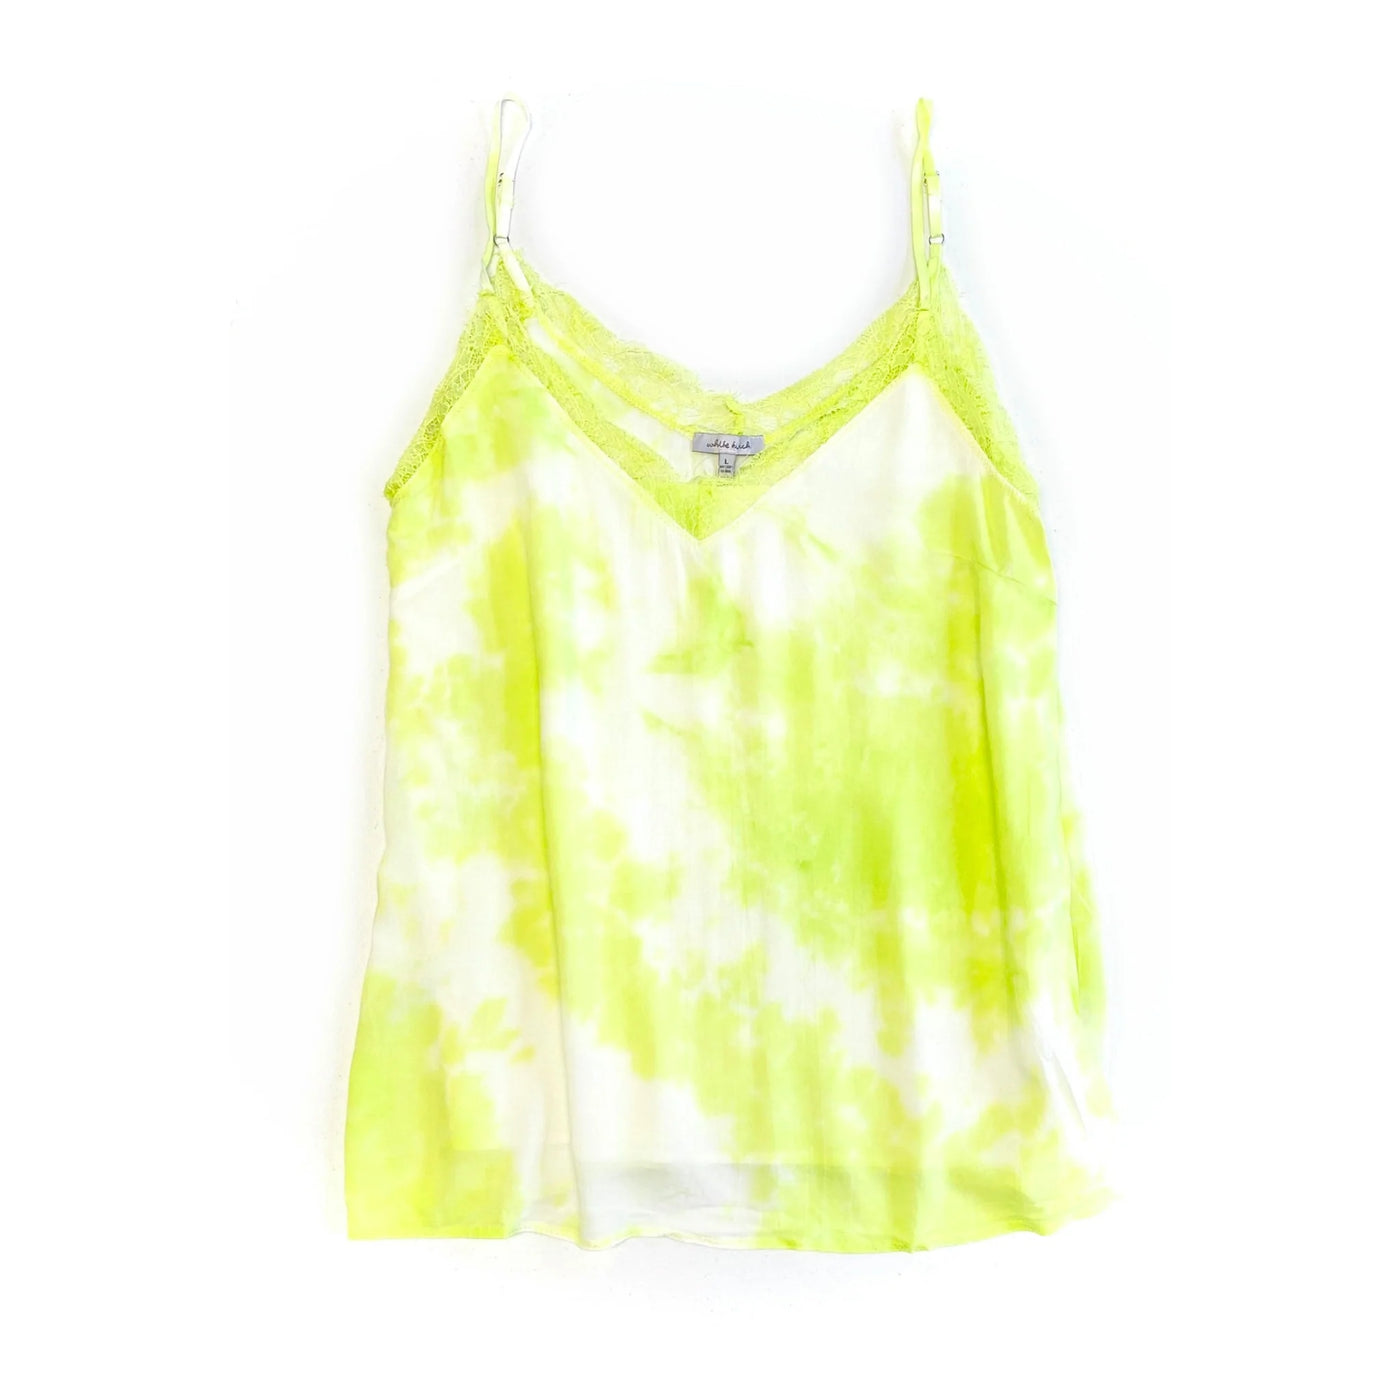 Love Into the Light Tank in Lime - Copper + Rose